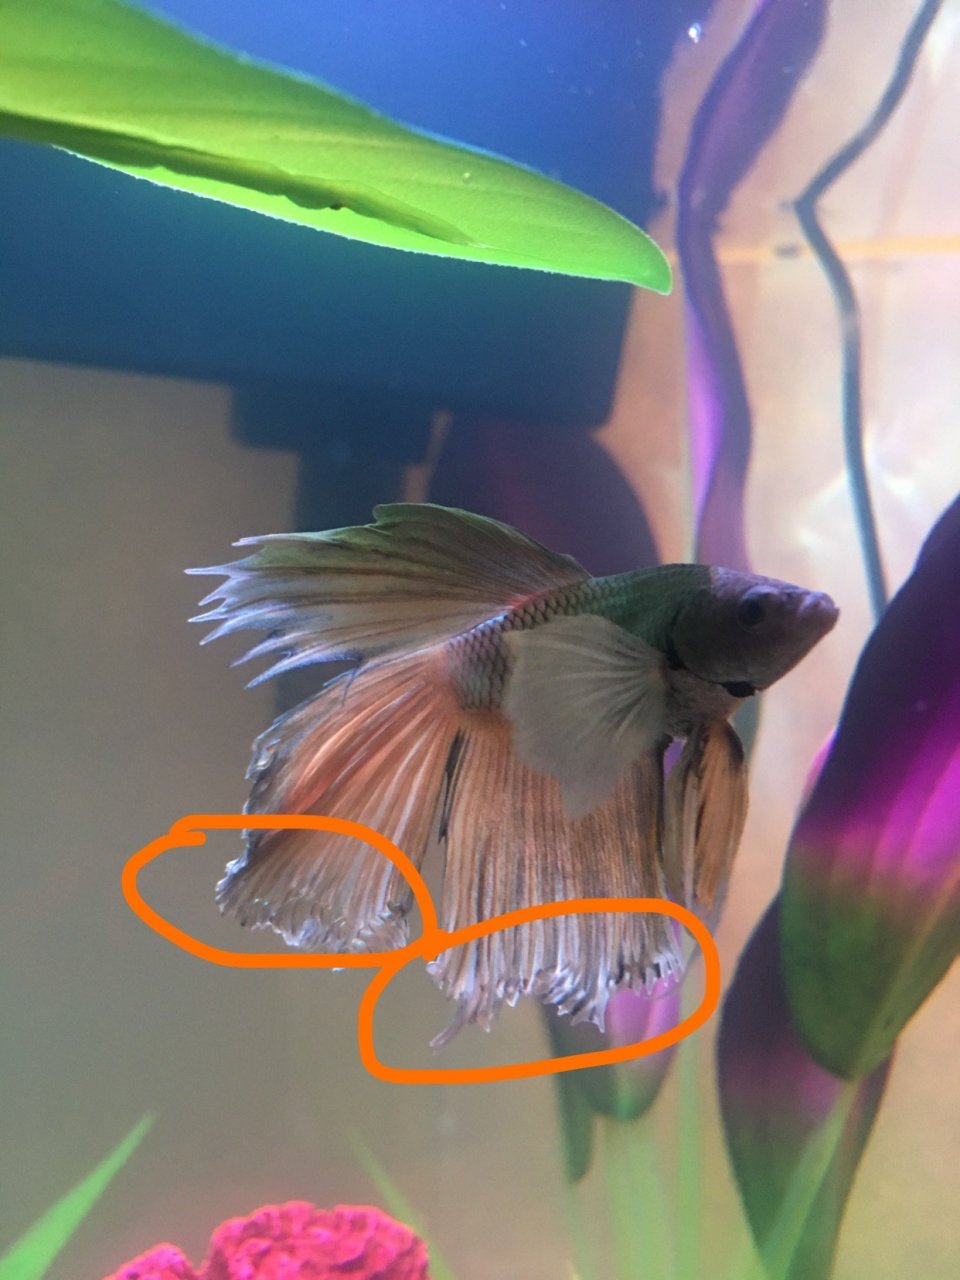 Halfmoon Betta With A Clamped Fin??? Help